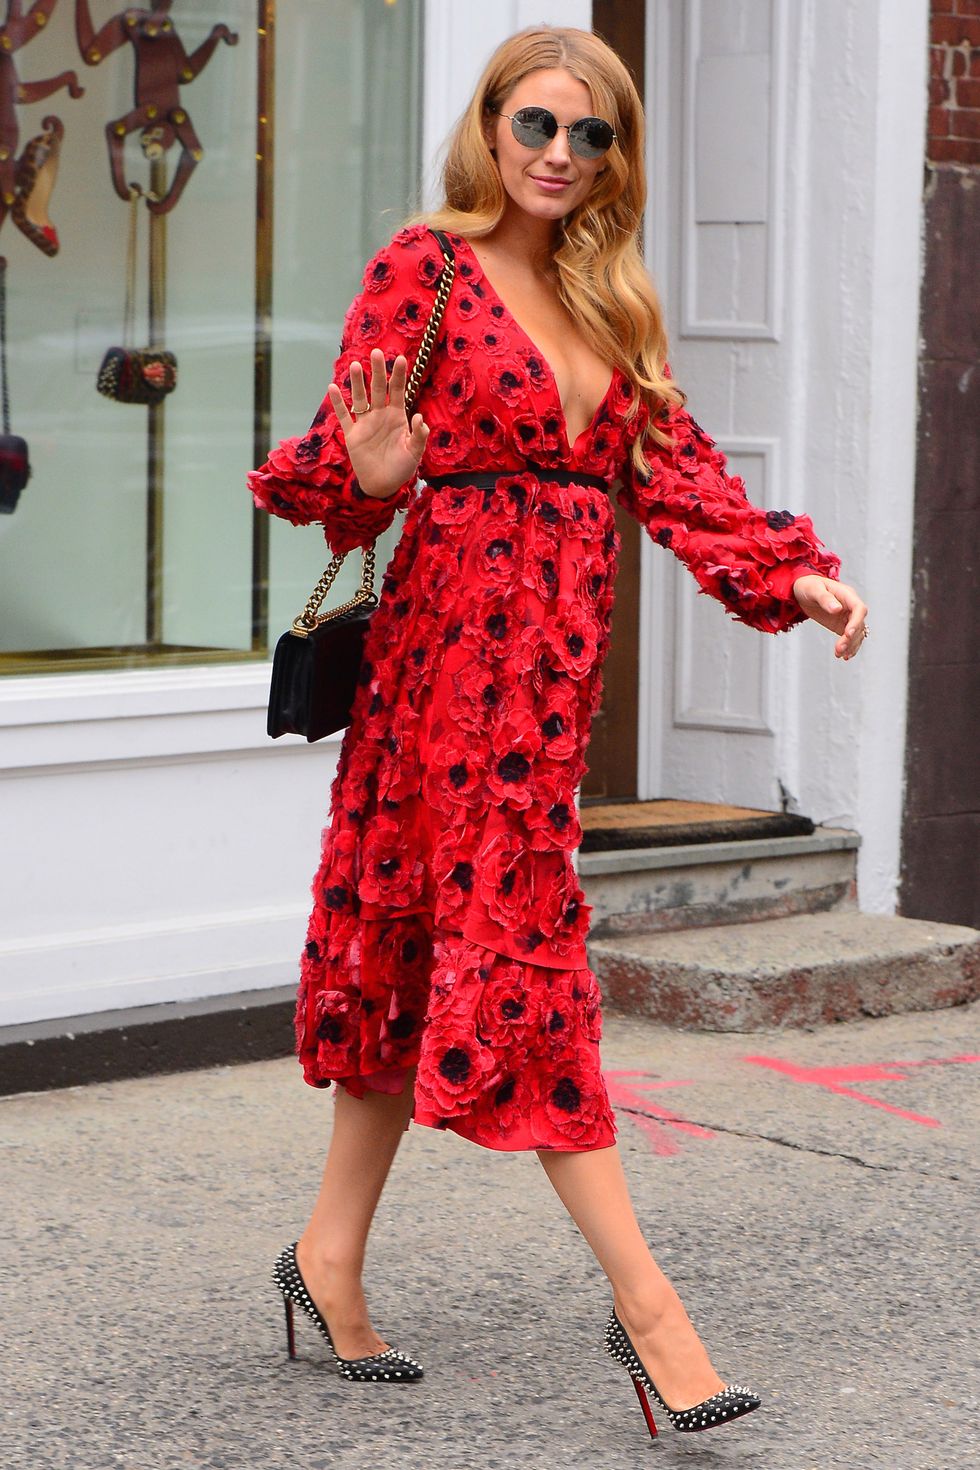 Blake Lively wearing a floral dress